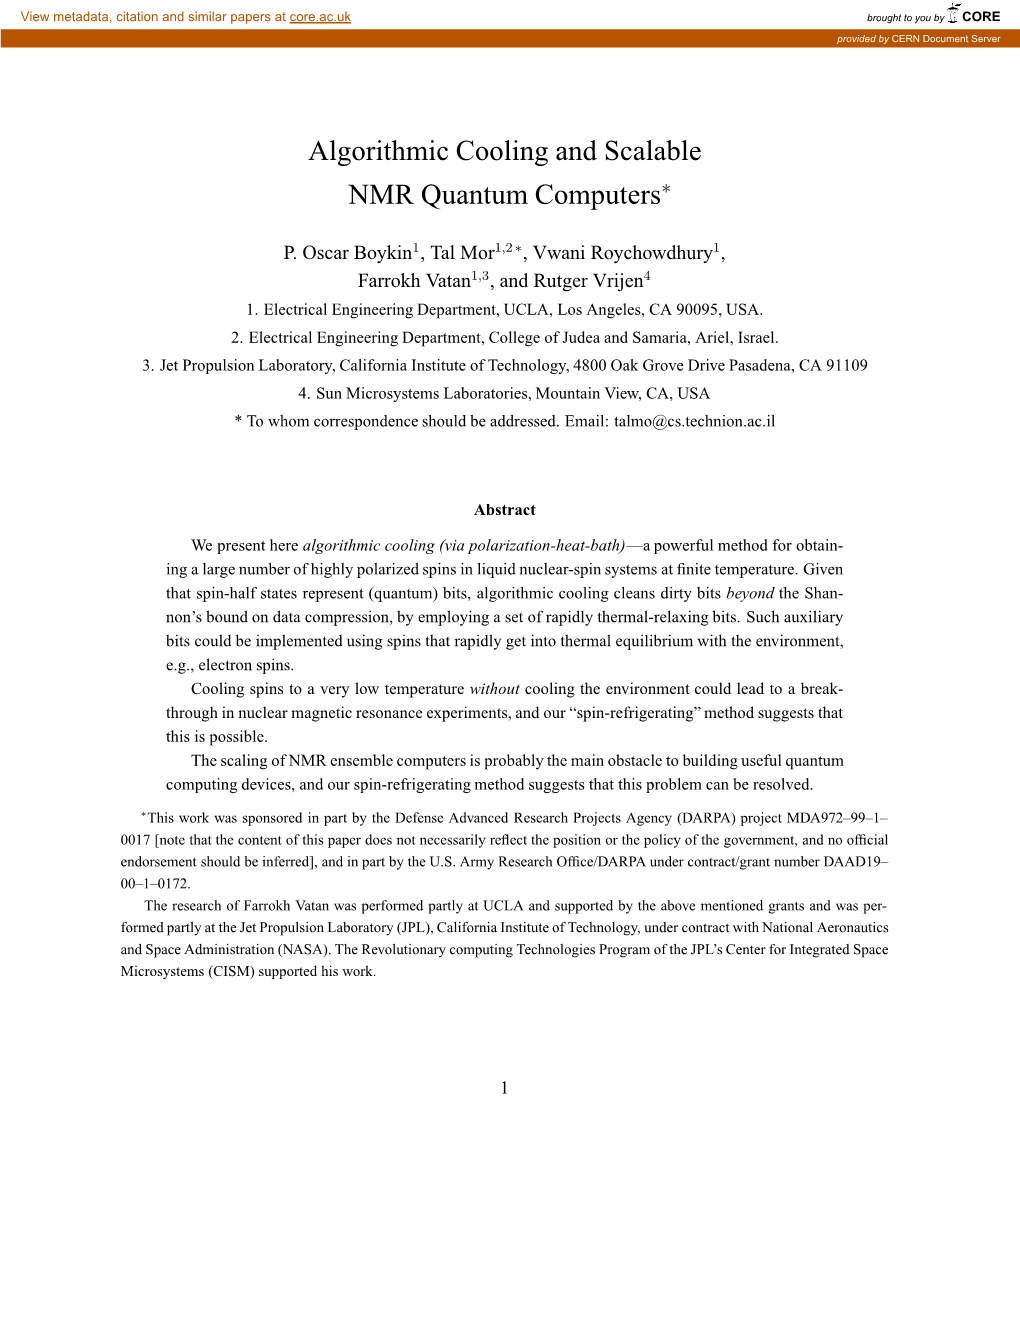 Algorithmic Cooling and Scalable NMR Quantum Computers